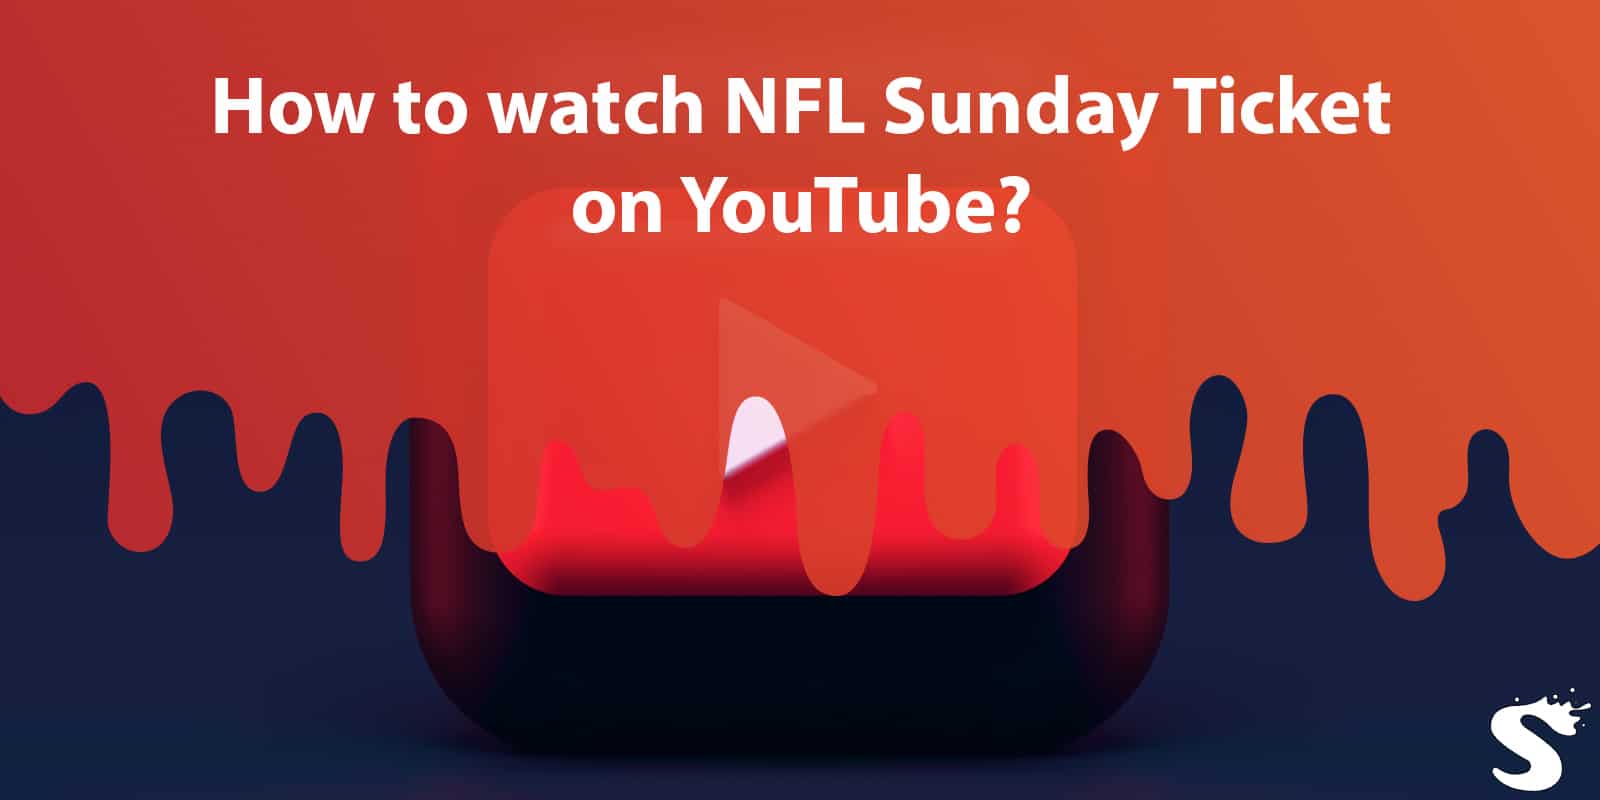 How to watch NFL Sunday Ticket on YouTube?